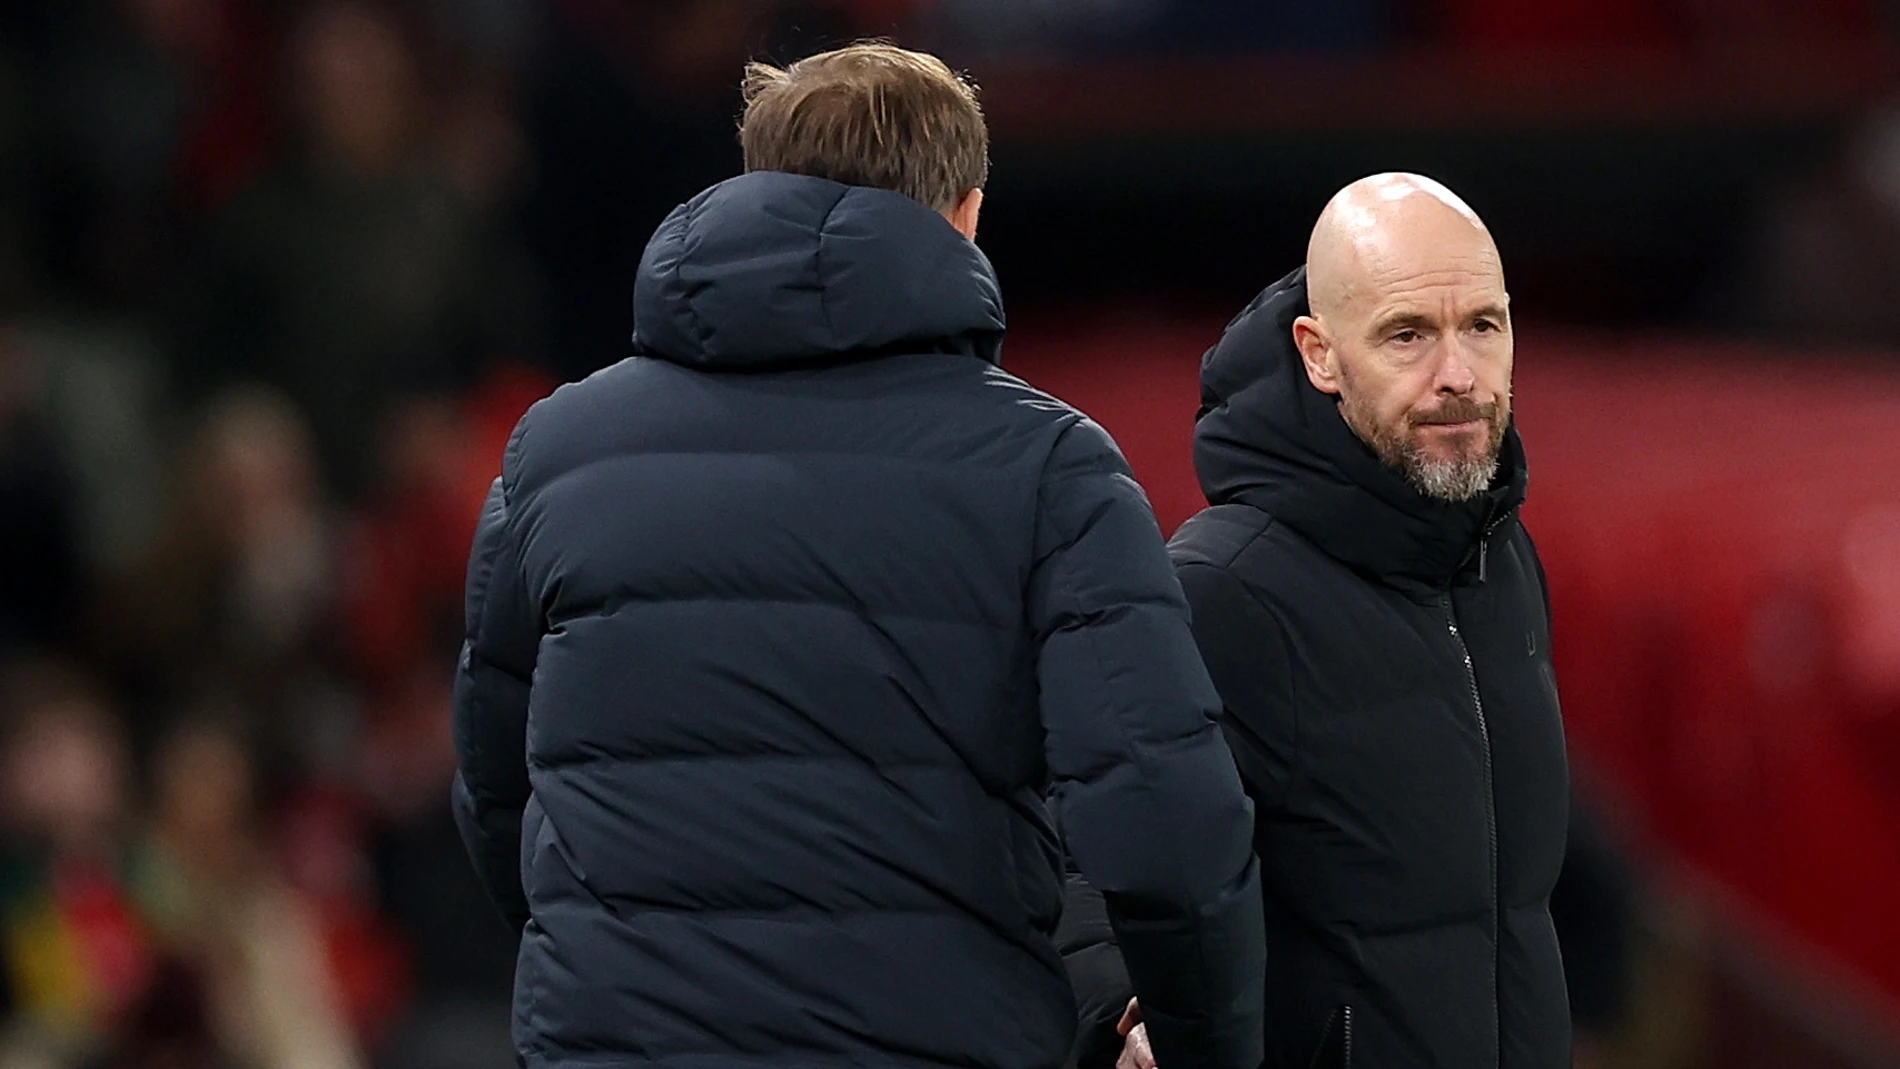 Manchester (United Kingdom), 12/12/2023.- Manchester United manager Erik ten Hag (R) shakes hands with Bayern Munich head coach Thomas Tuchel after the UEFA Champions League group match between Manchester United and FC Bayern Munich, in Manchester, Britain, 12 December 2023. Manchester United lost 0-1. (Liga de Campeones, Reino Unido) EFE/EPA/ADAM VAUGHAN